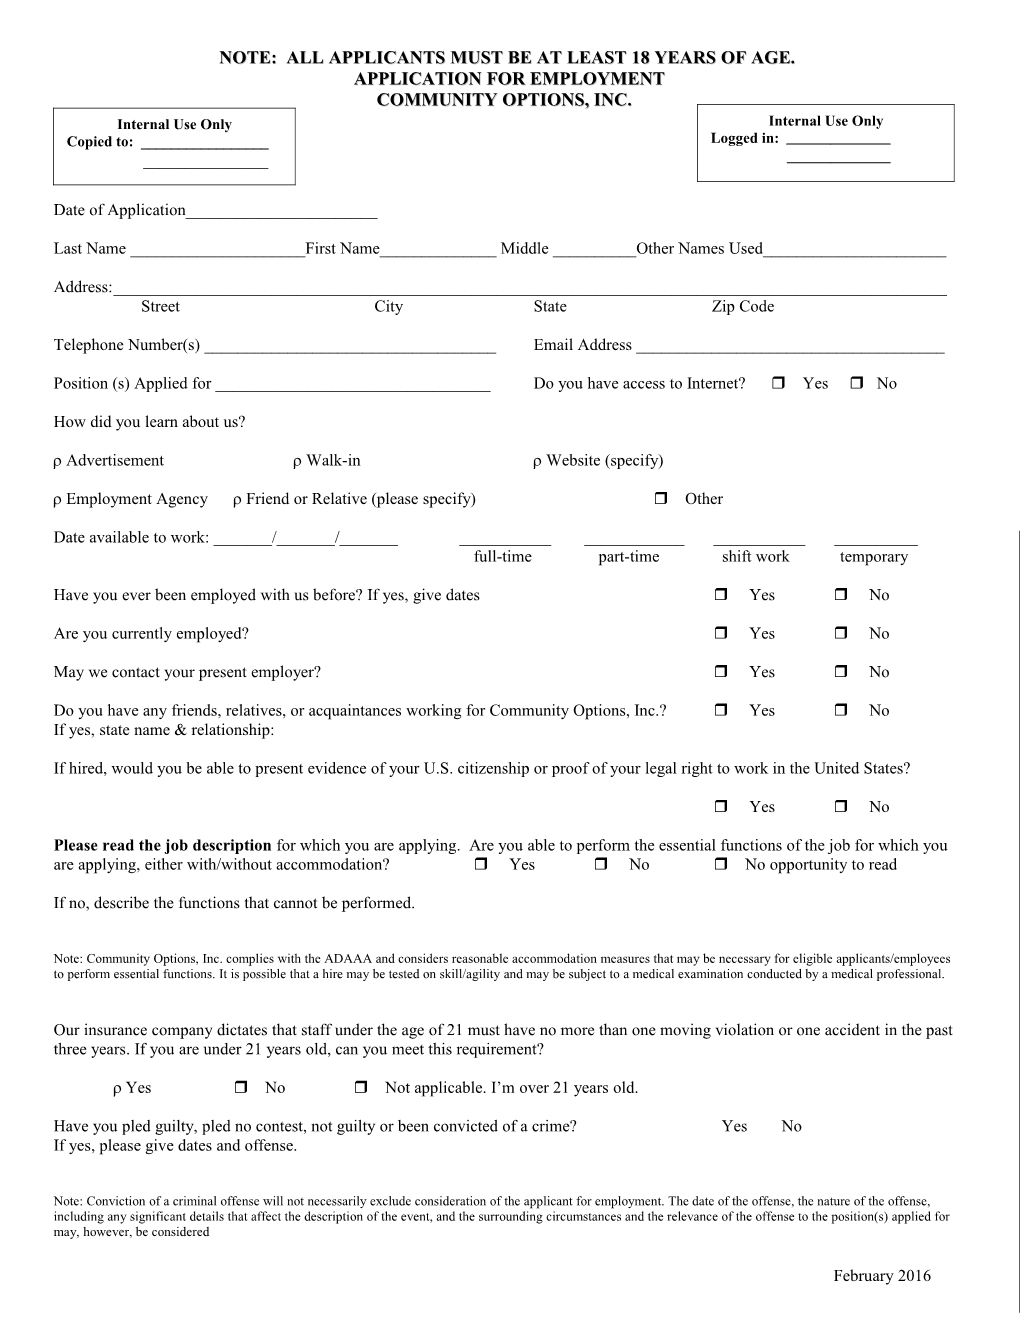 Application for Employment s139